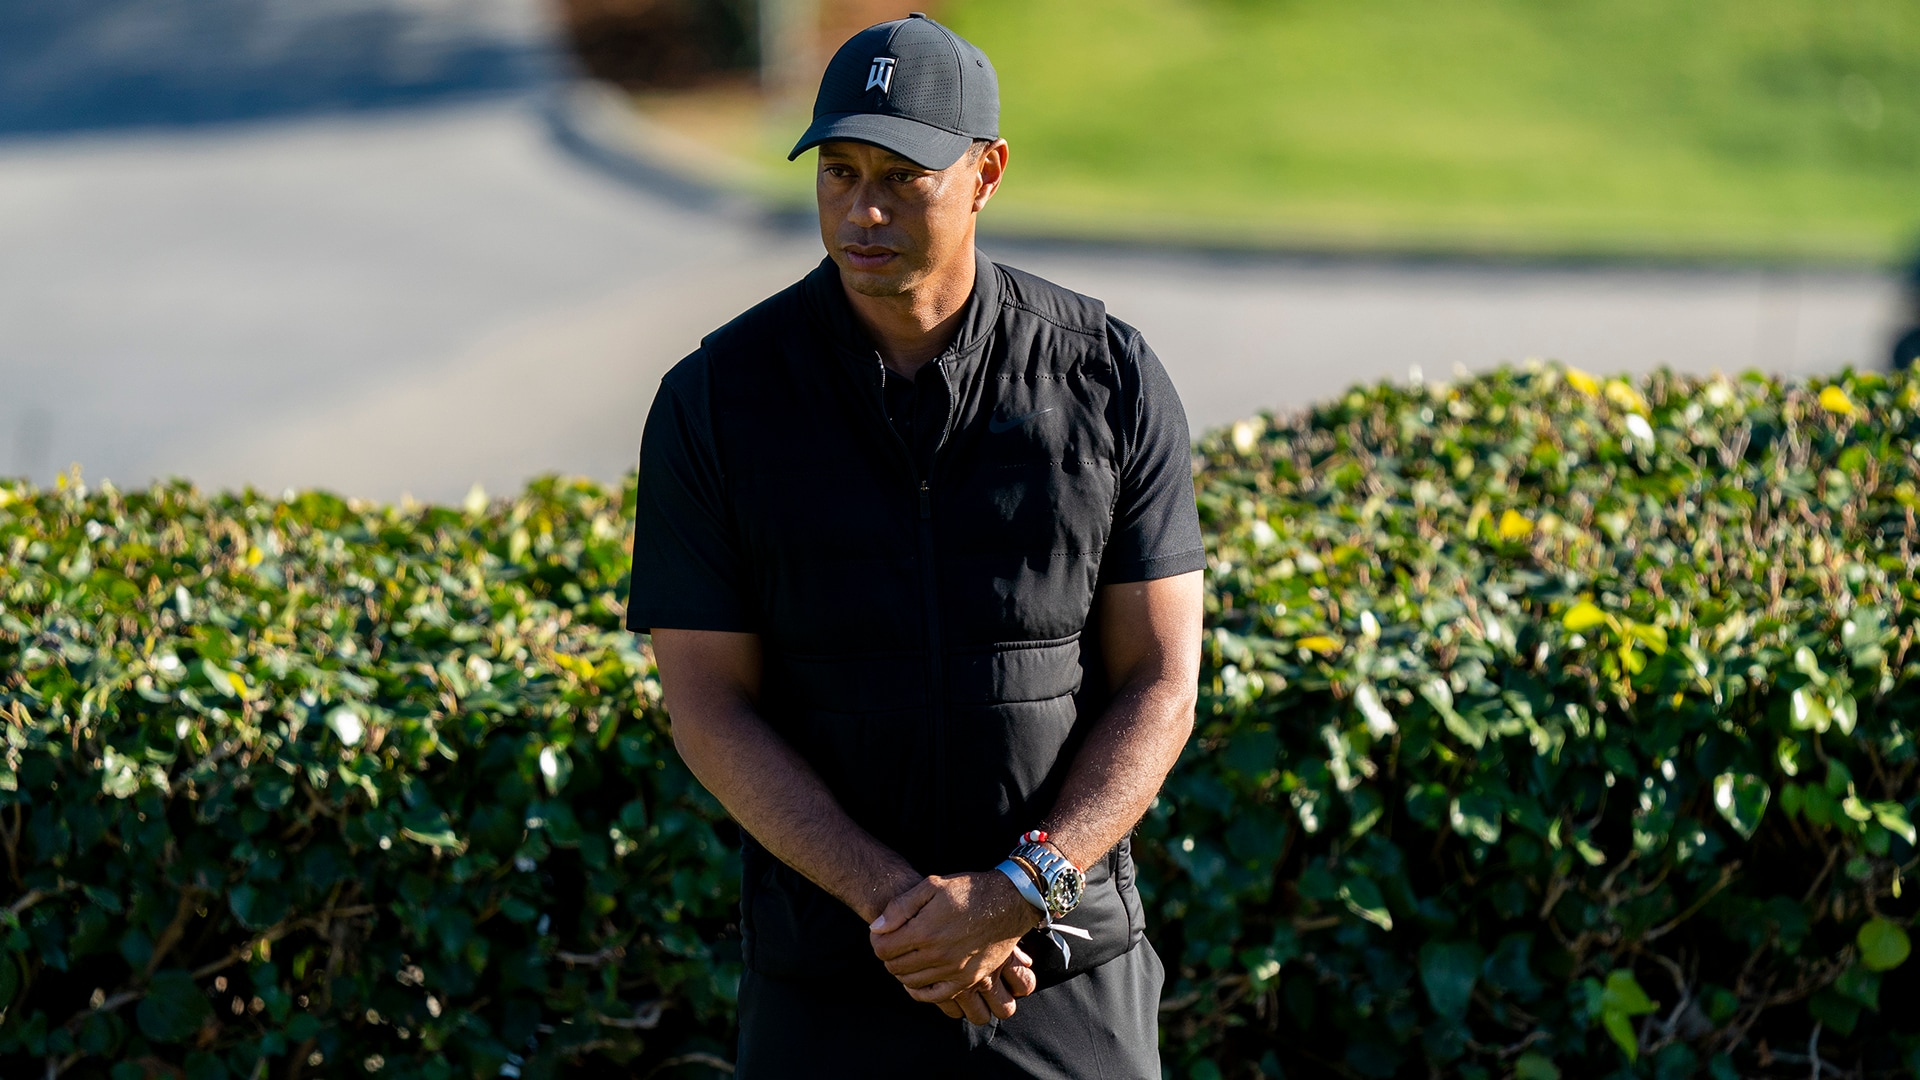 Sheriff: No ‘probable cause’ to issue search warrant for Tiger Woods’ blood work